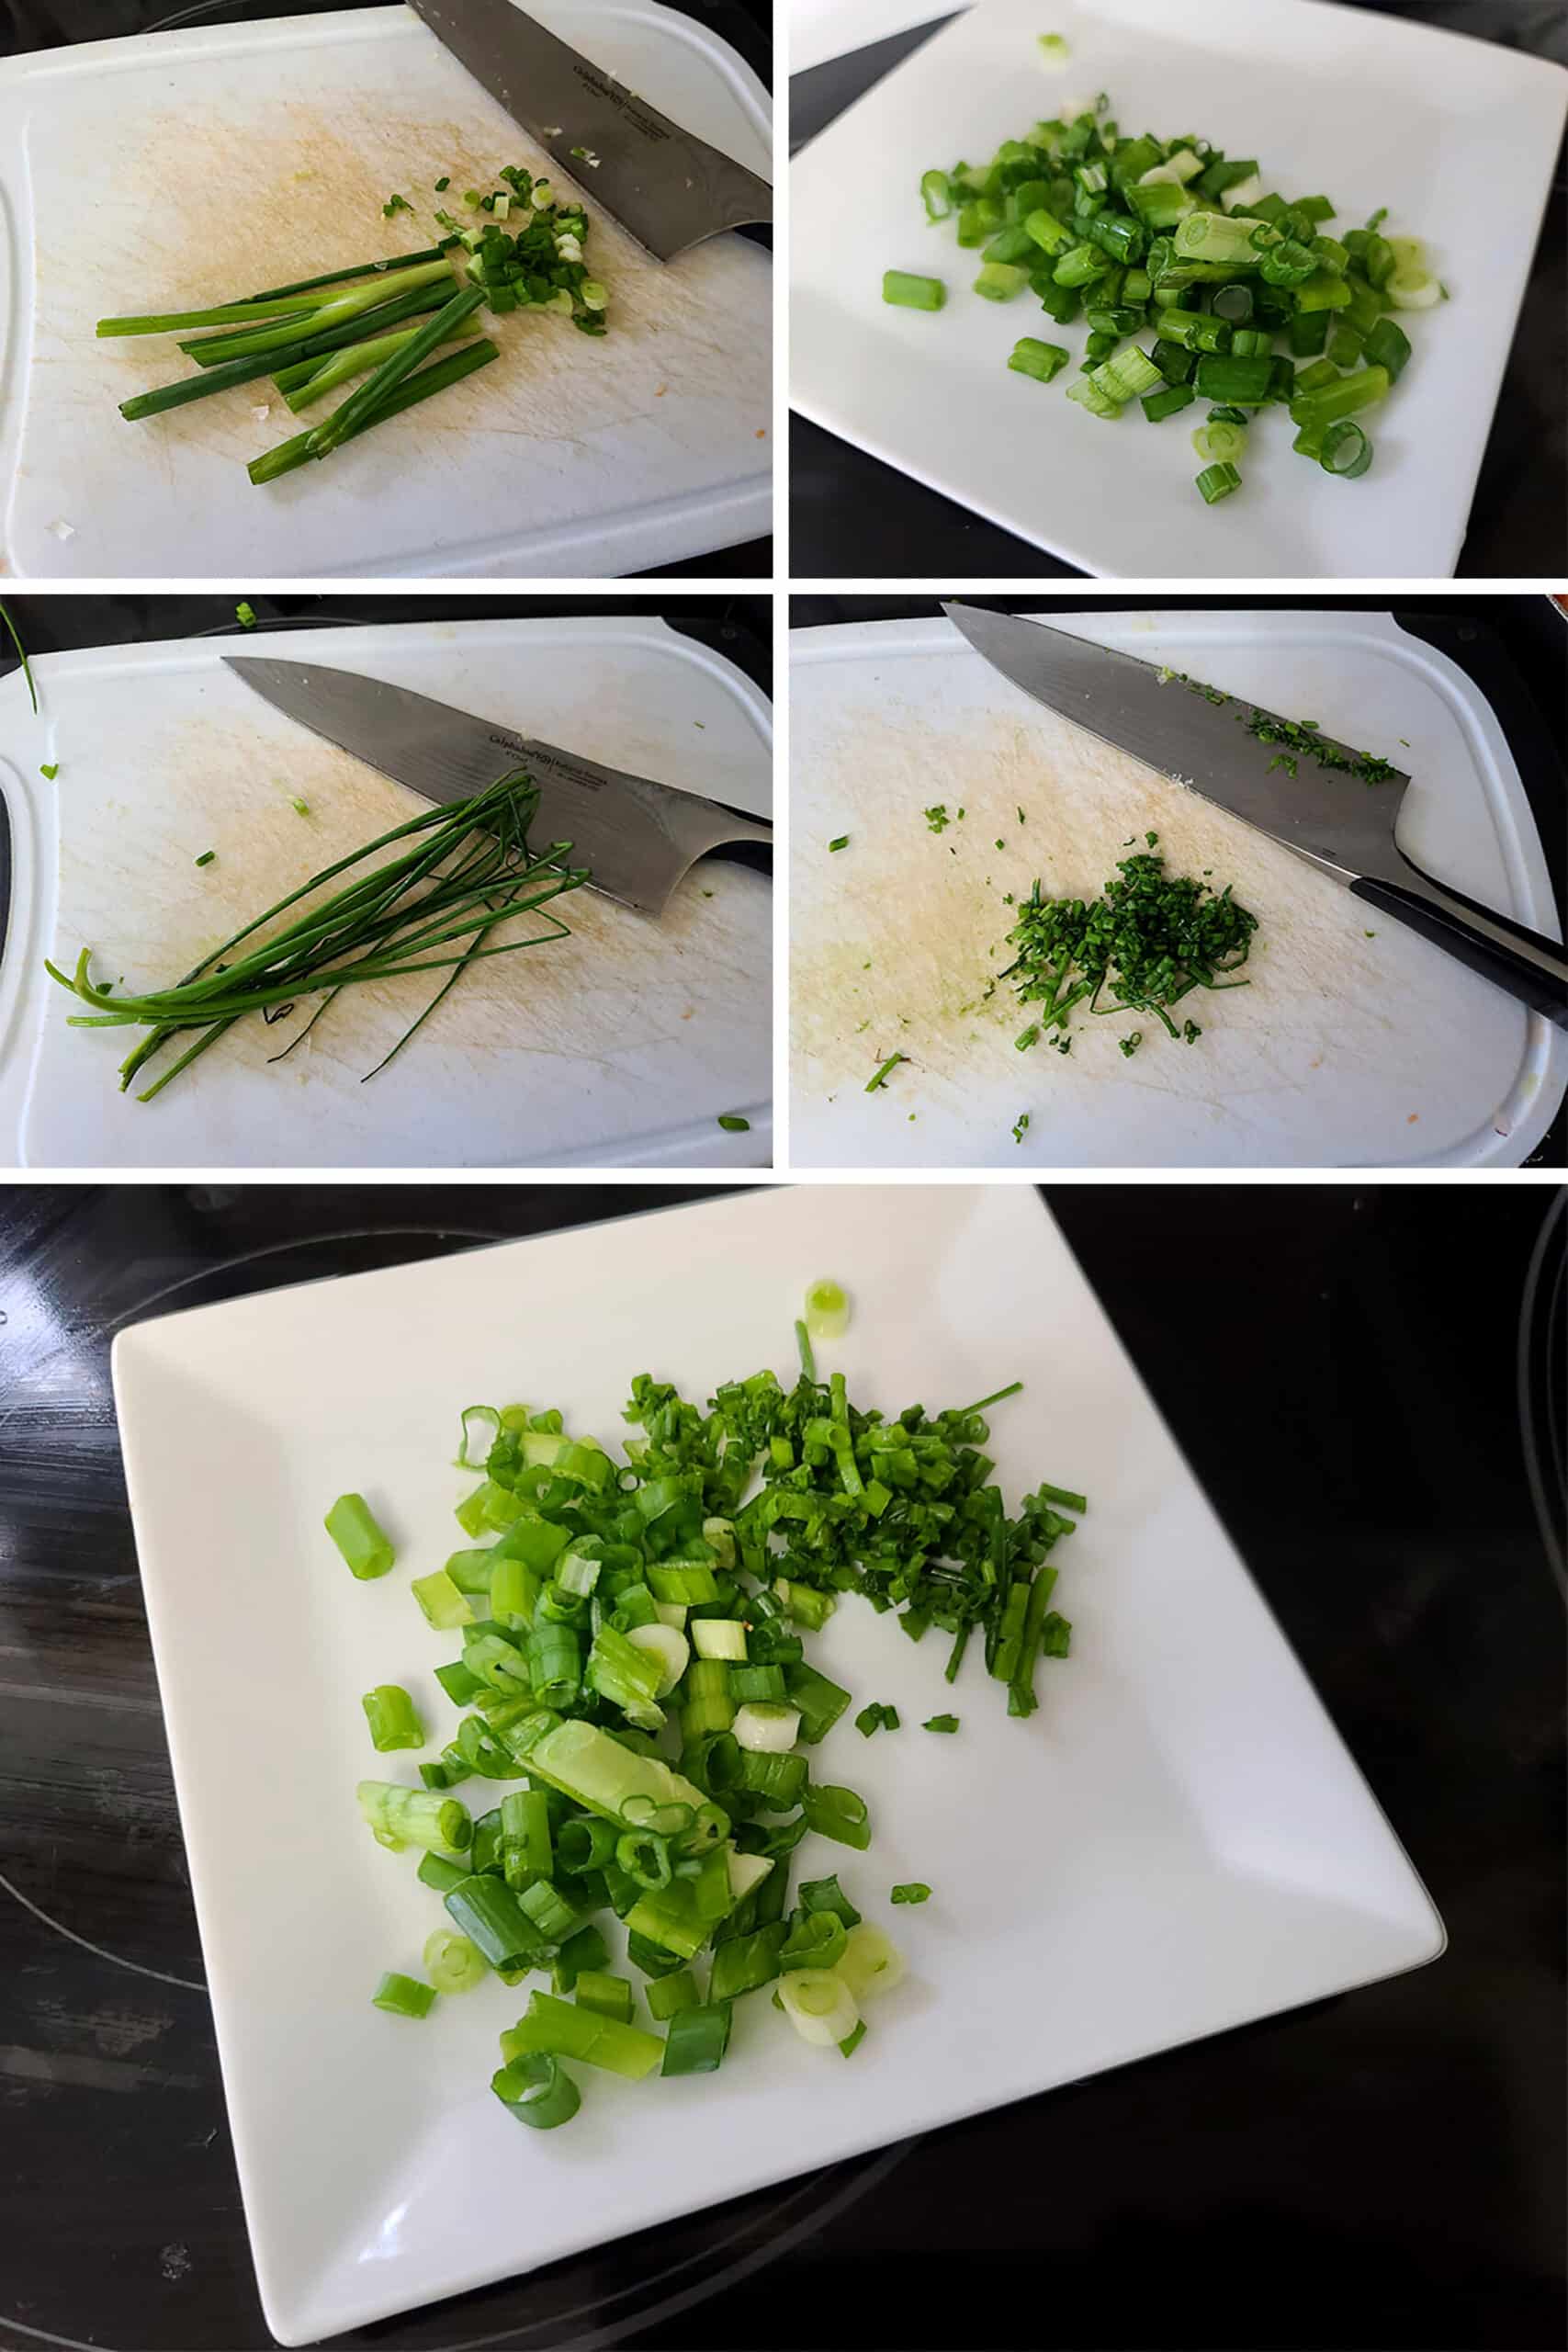 A 5 part image showing the fresh dill, chives, and green onions being chopped and sliced.